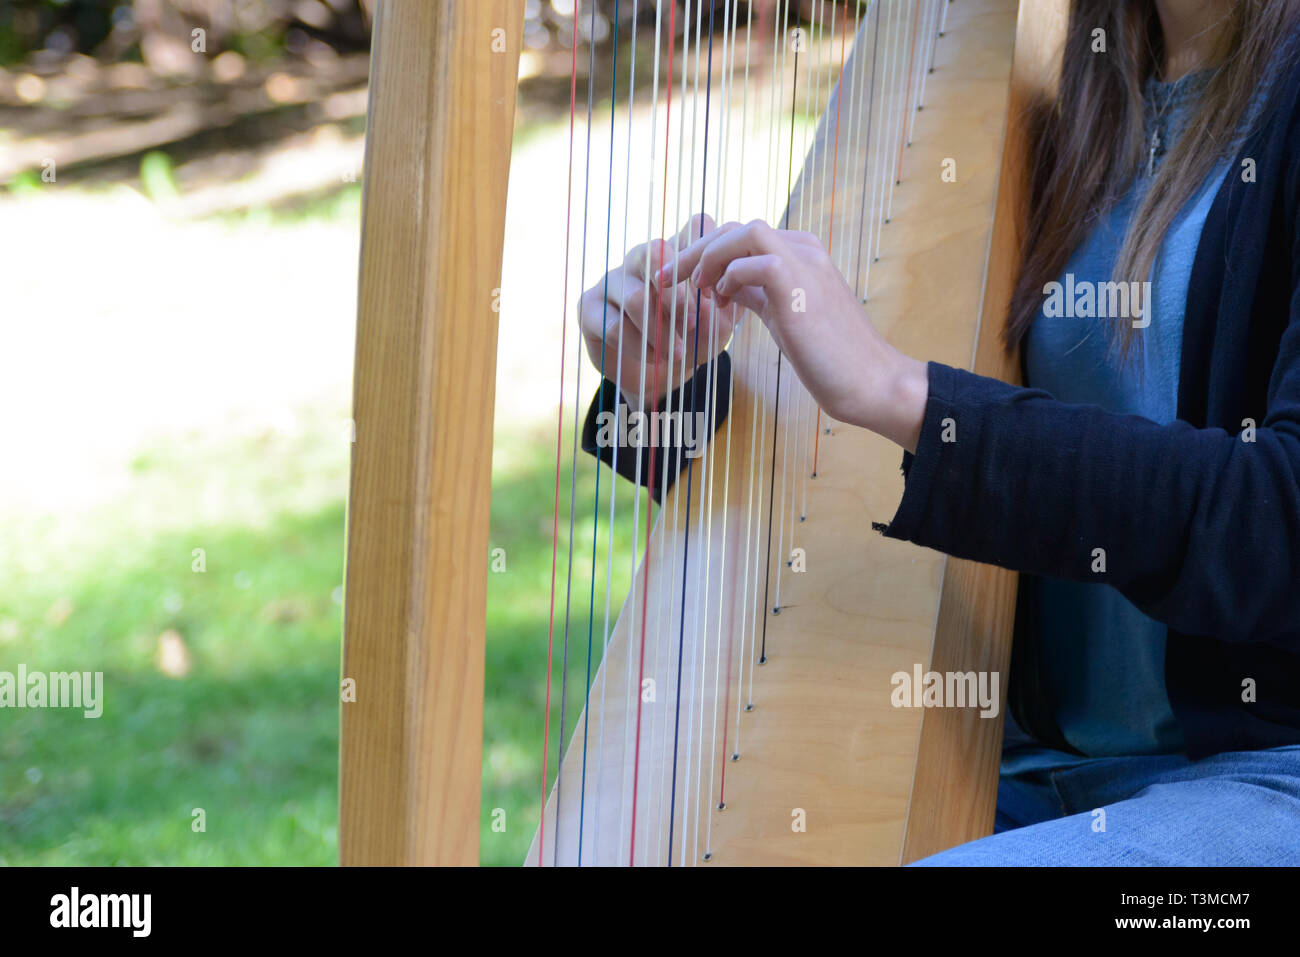 hands plucking the strings of a harp Stock Photo